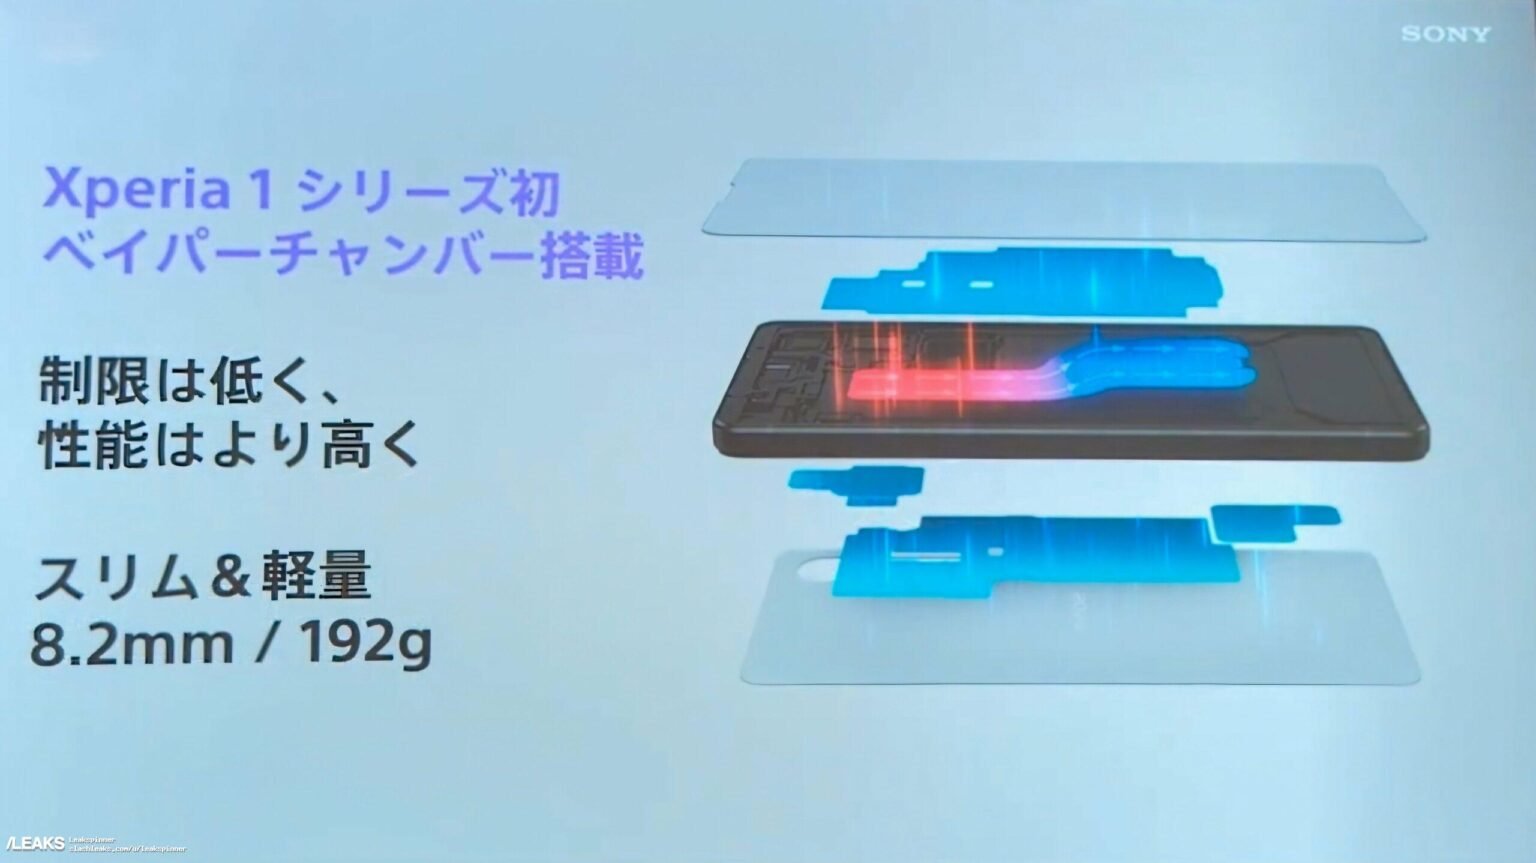 Sony Xperia 1 Vi Presentation Slides Surfaces Hours Ahead Launch 15 Scaled